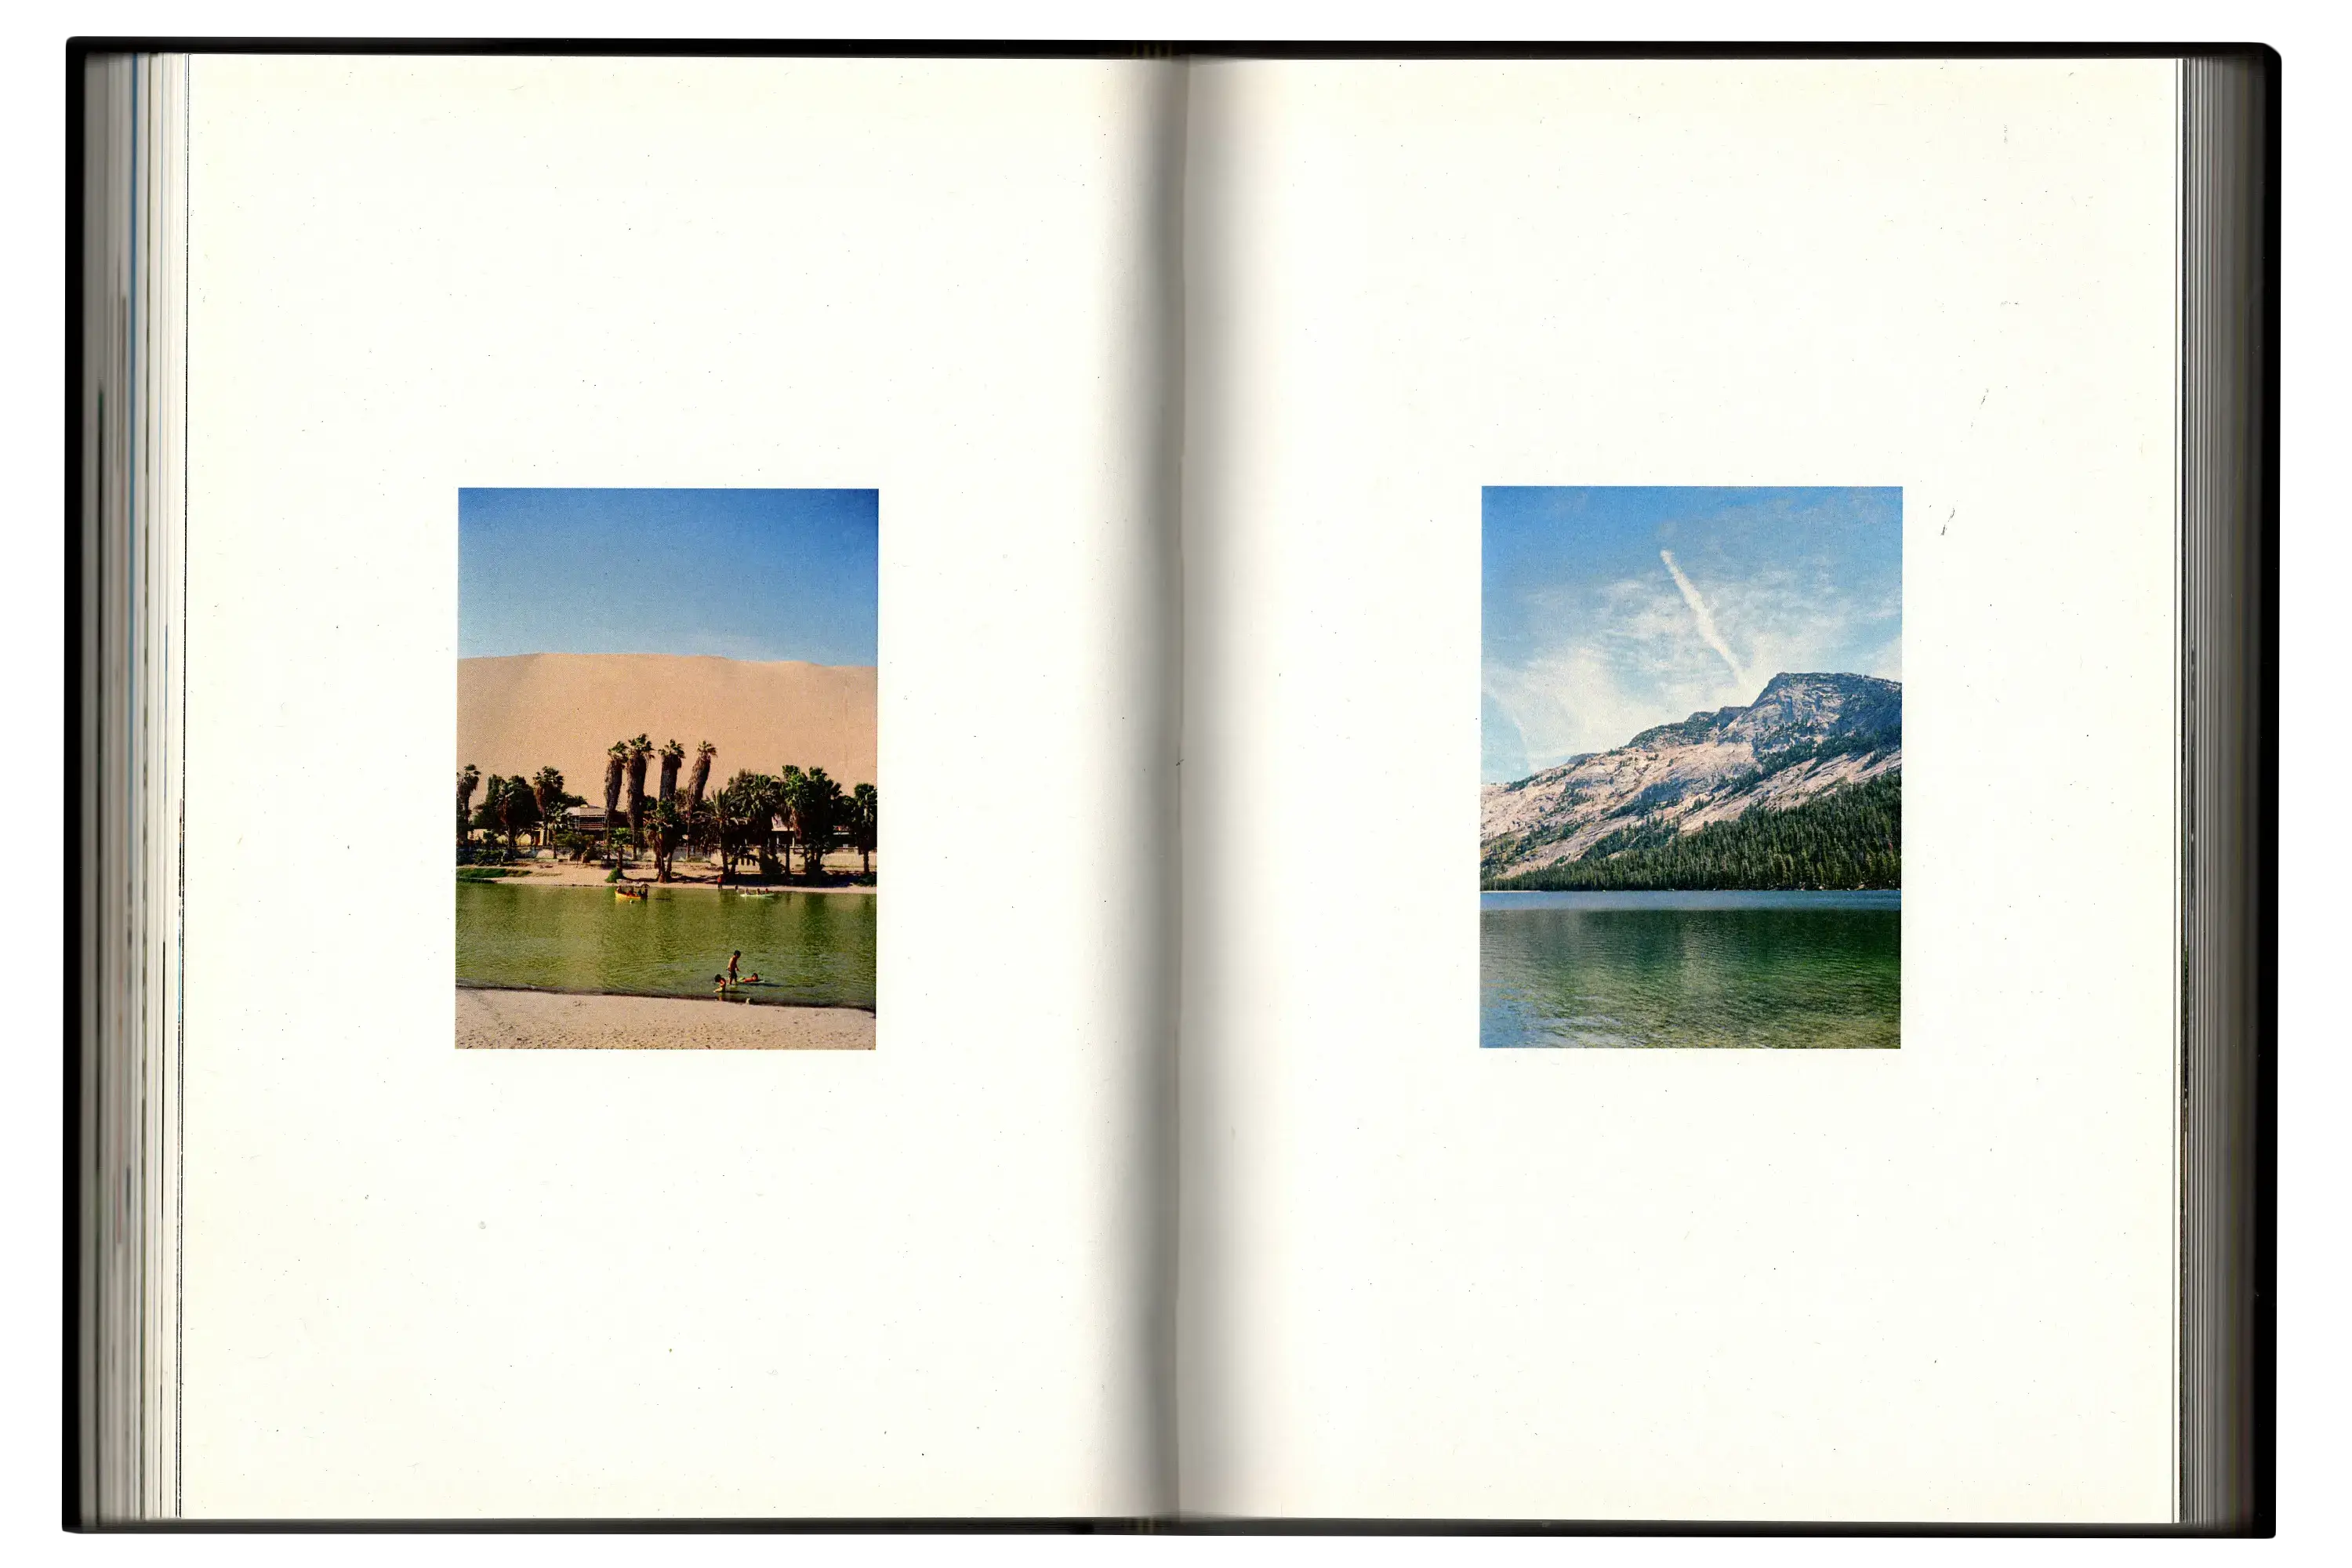 Imperfect Photo Book - left page image of desert oasis, right page image of mountains in distance, forest and body of water